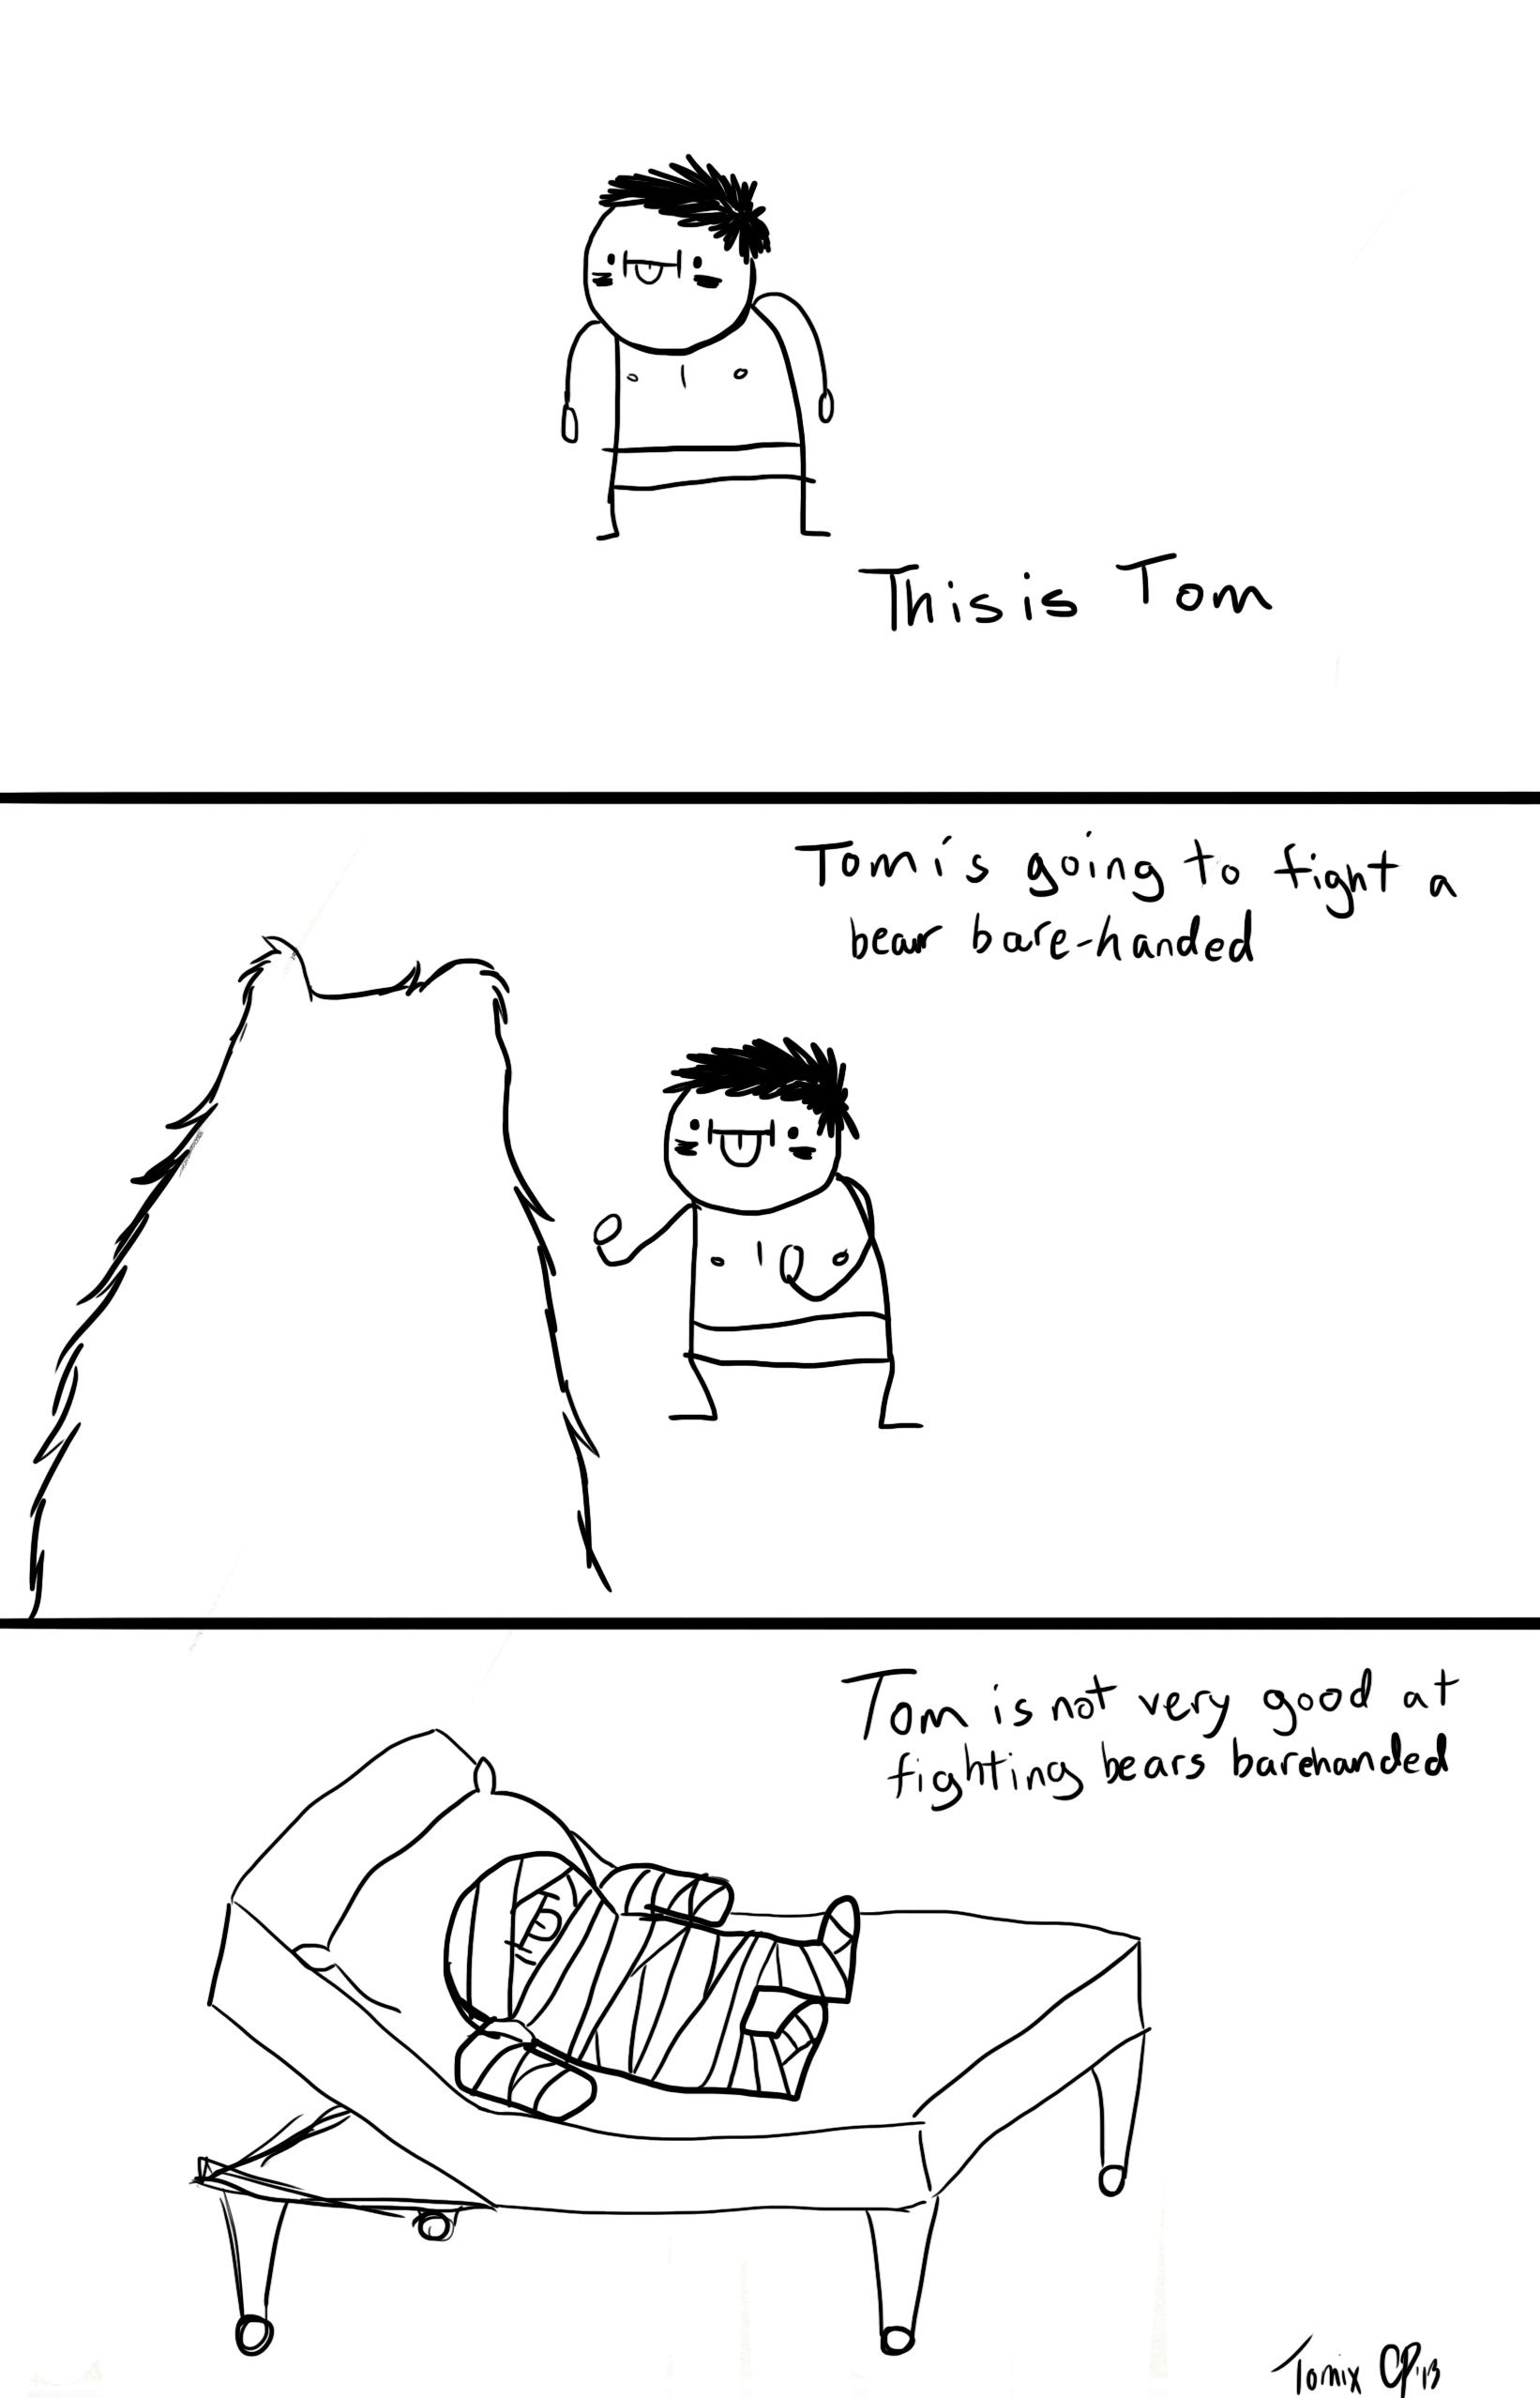 Tom fights a bear bare-handed